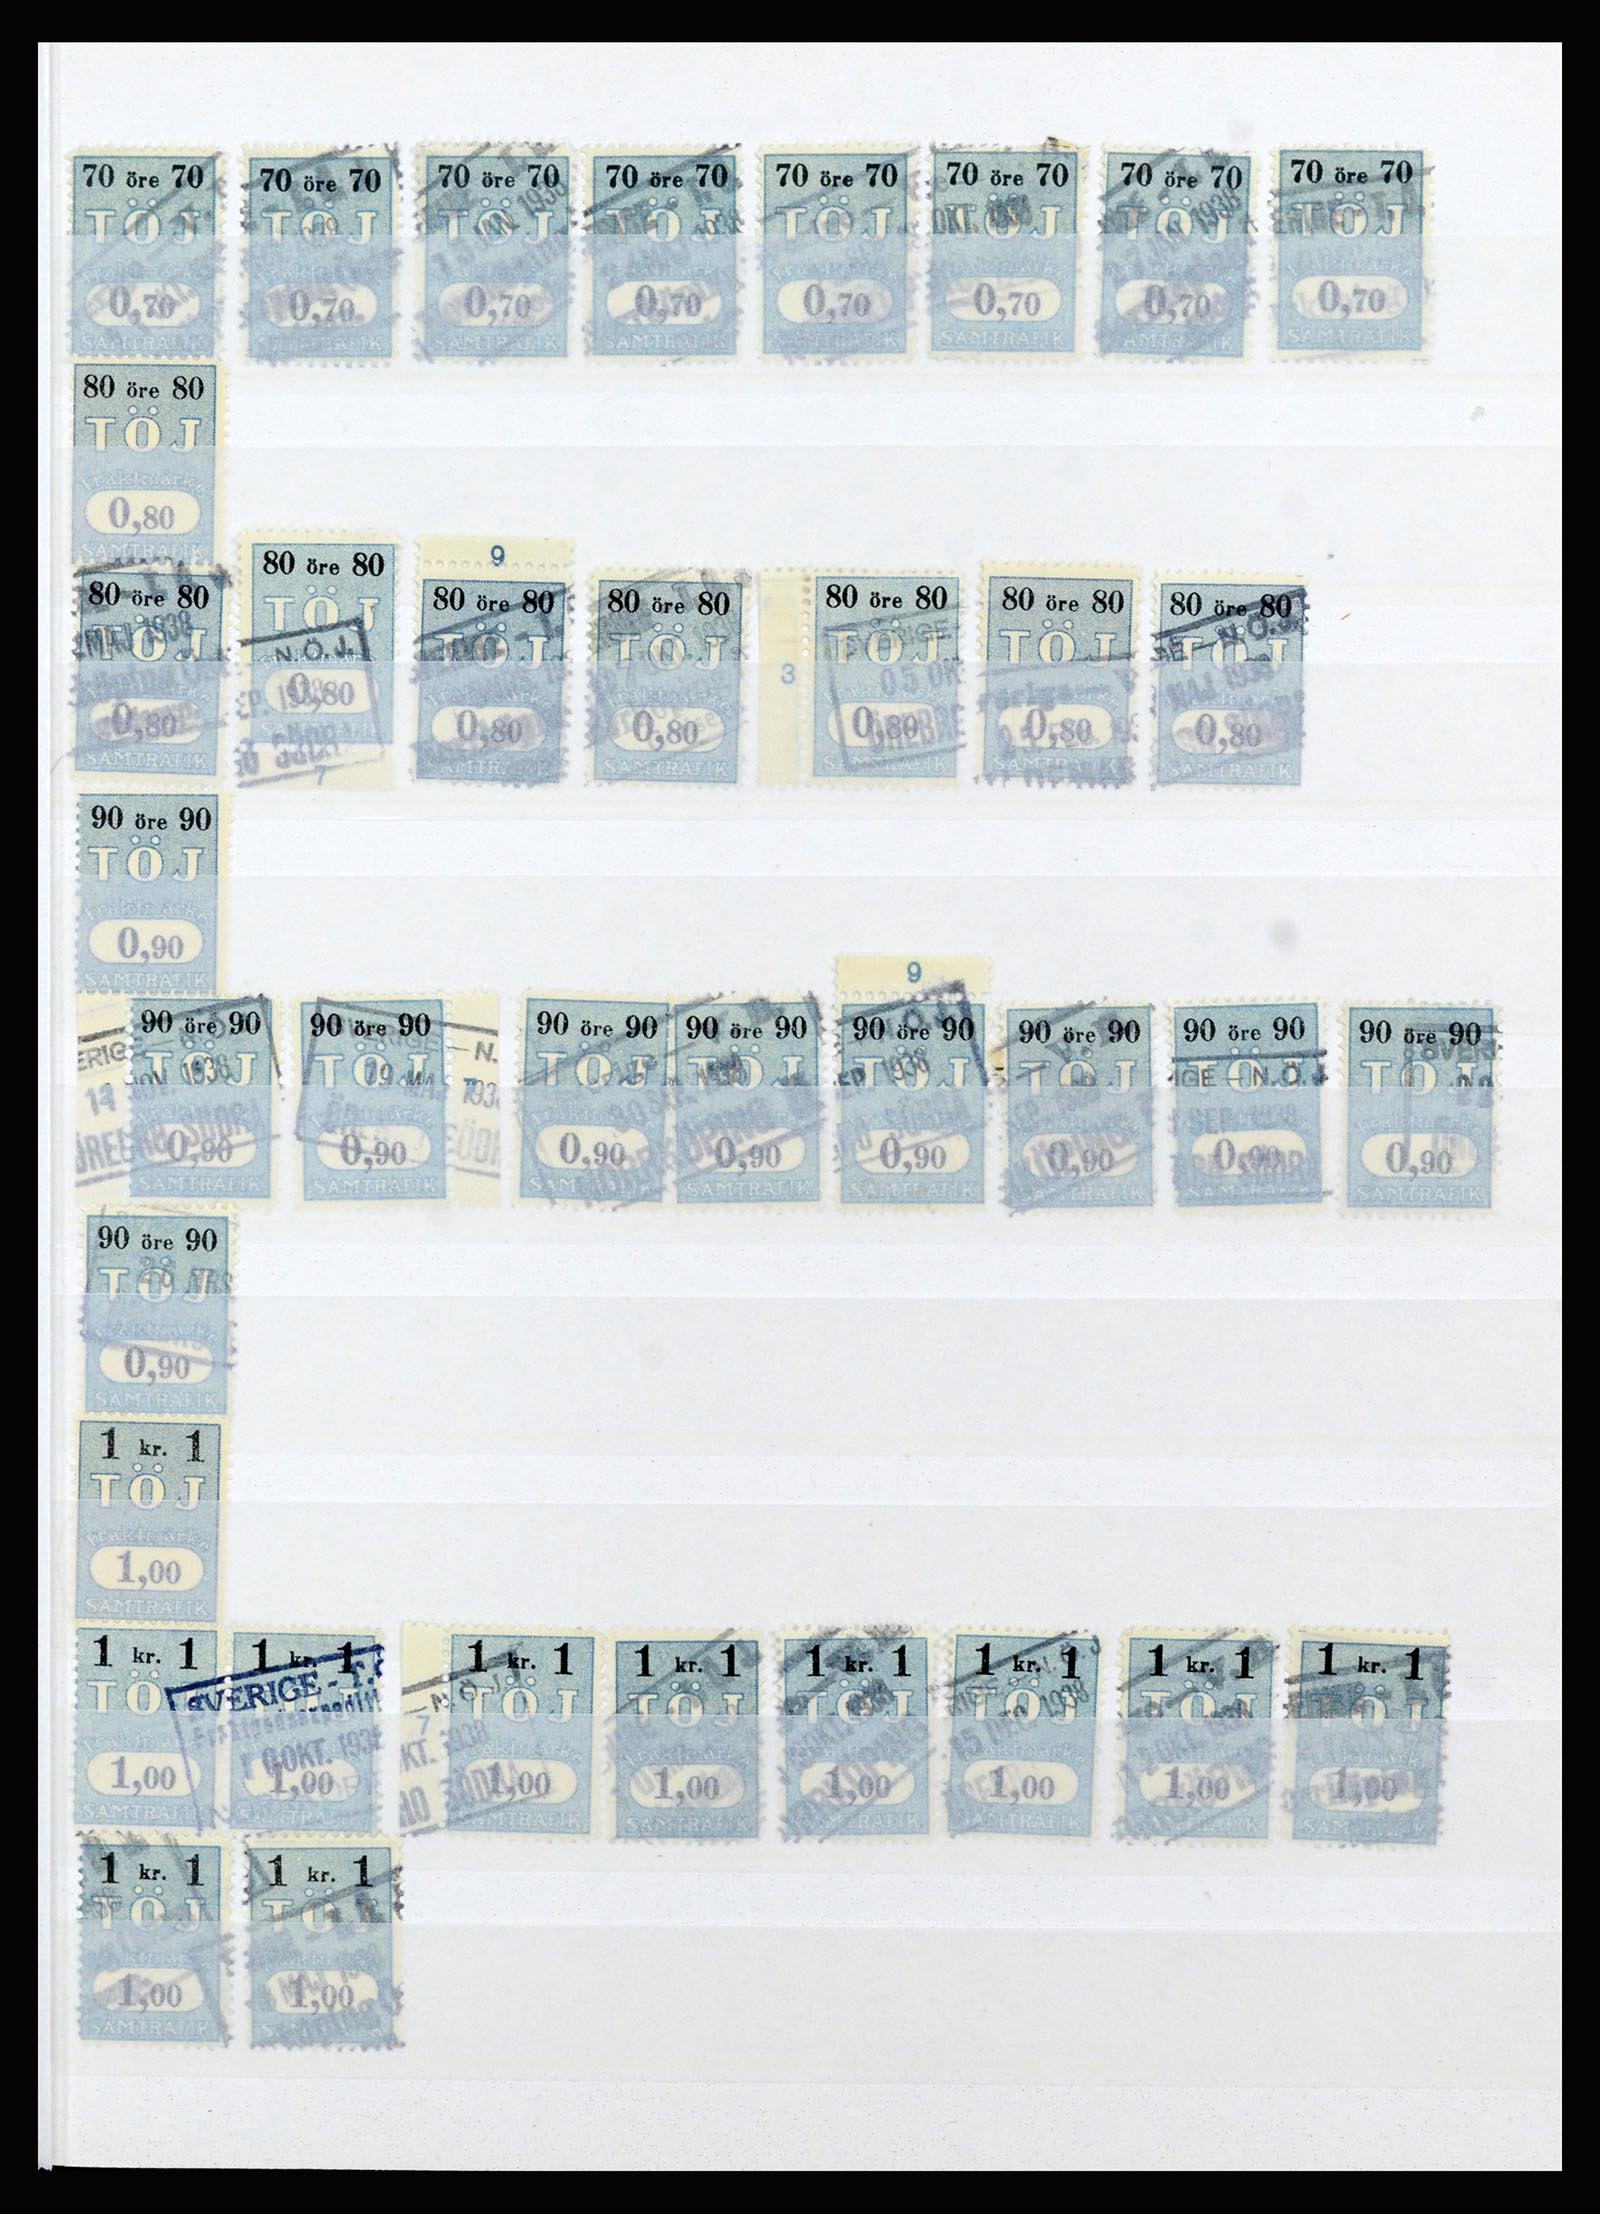 36981 021 - Stamp collection 36981 Scandinavia railroadstamps.